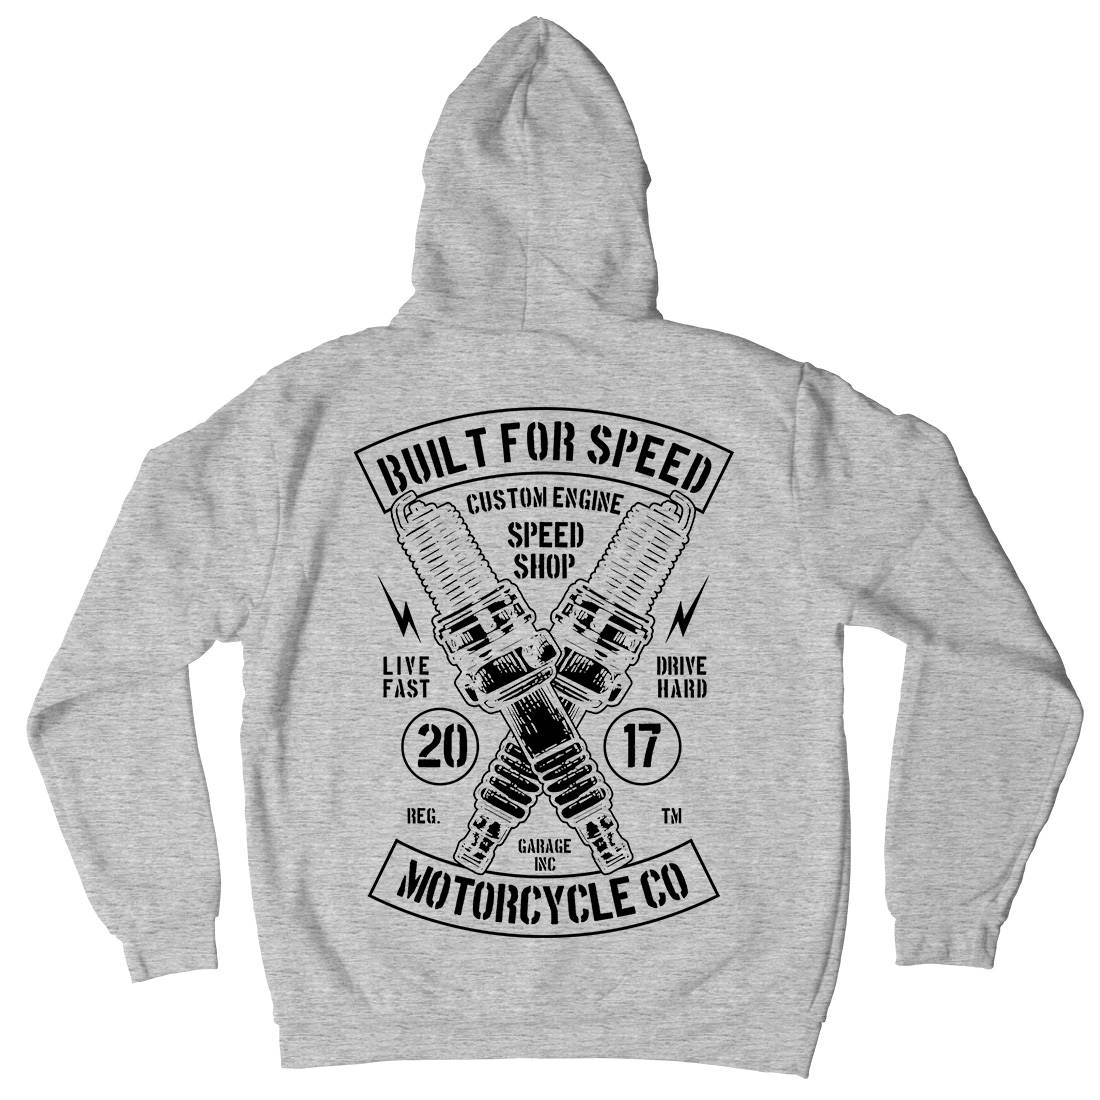 Built For Speed Mens Hoodie With Pocket Motorcycles B188